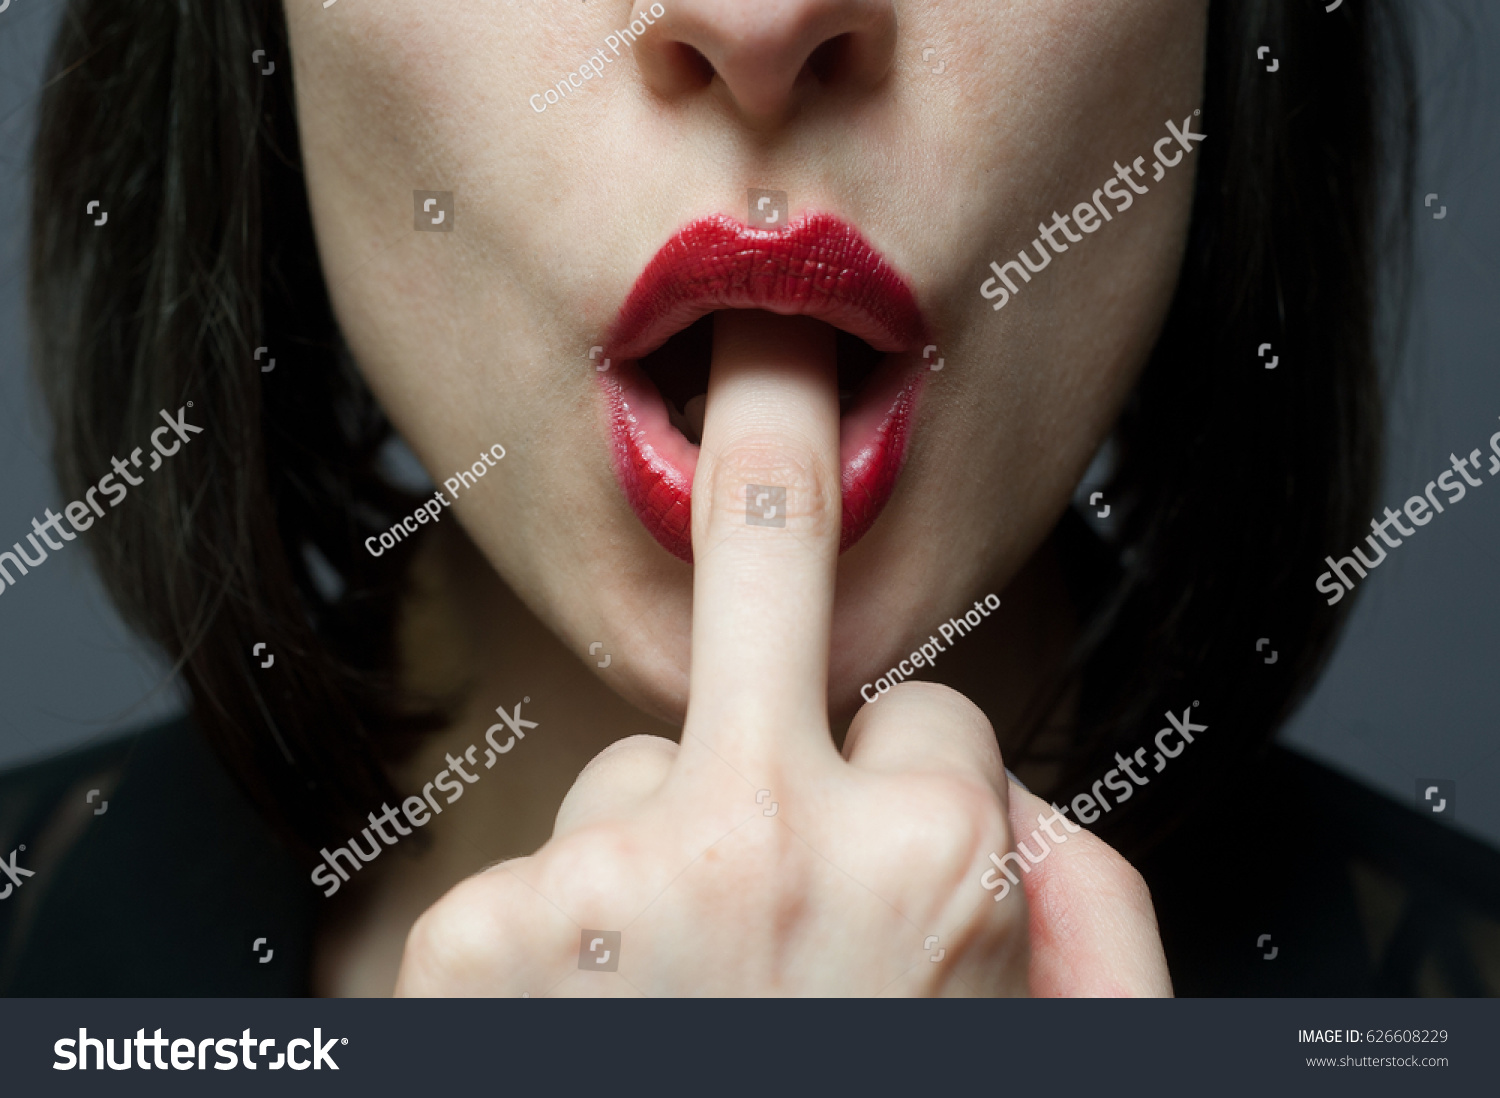 Sexy Finger In Mouth